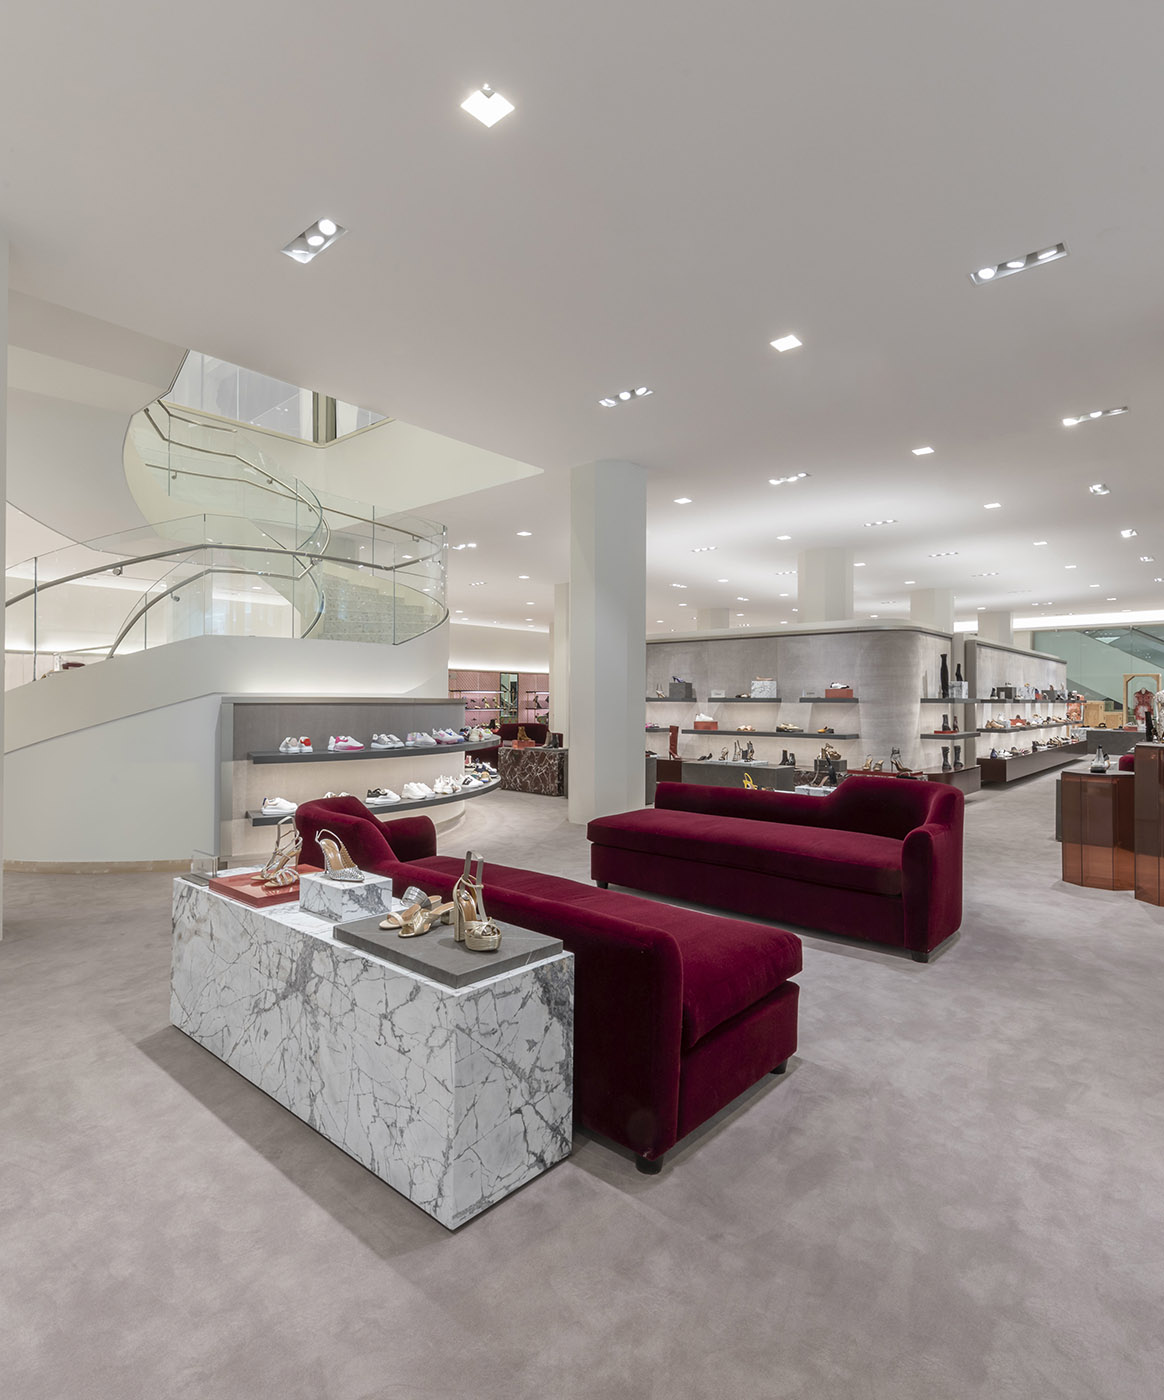 Holt Renfrew Ogilvy in Montreal. A sustainable space that houses big brand luxury